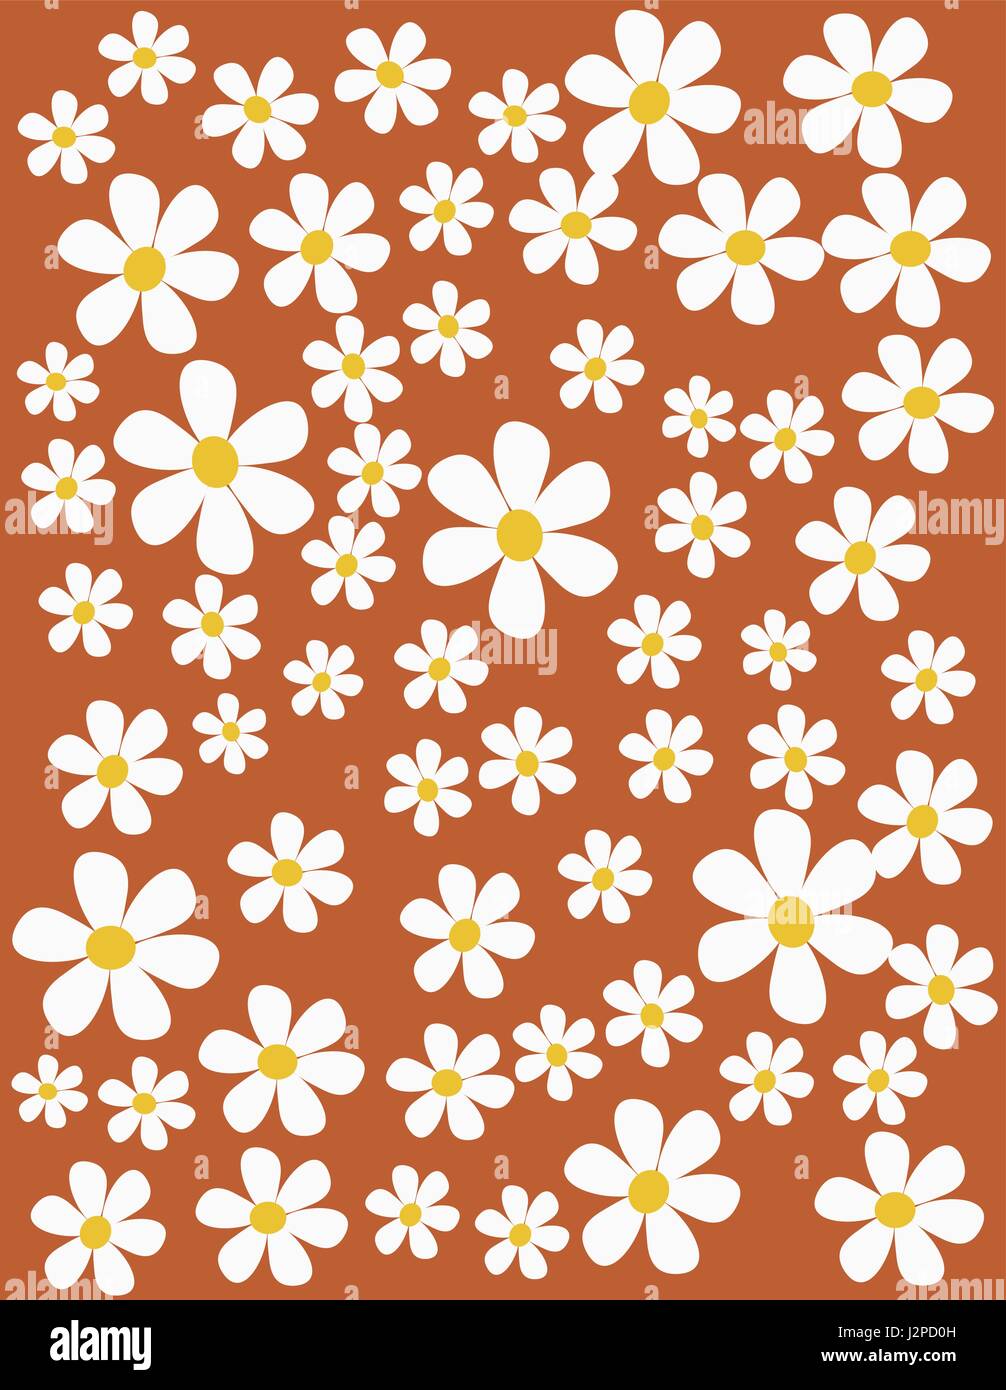 colorful spring flowers vector illustration Stock Vector